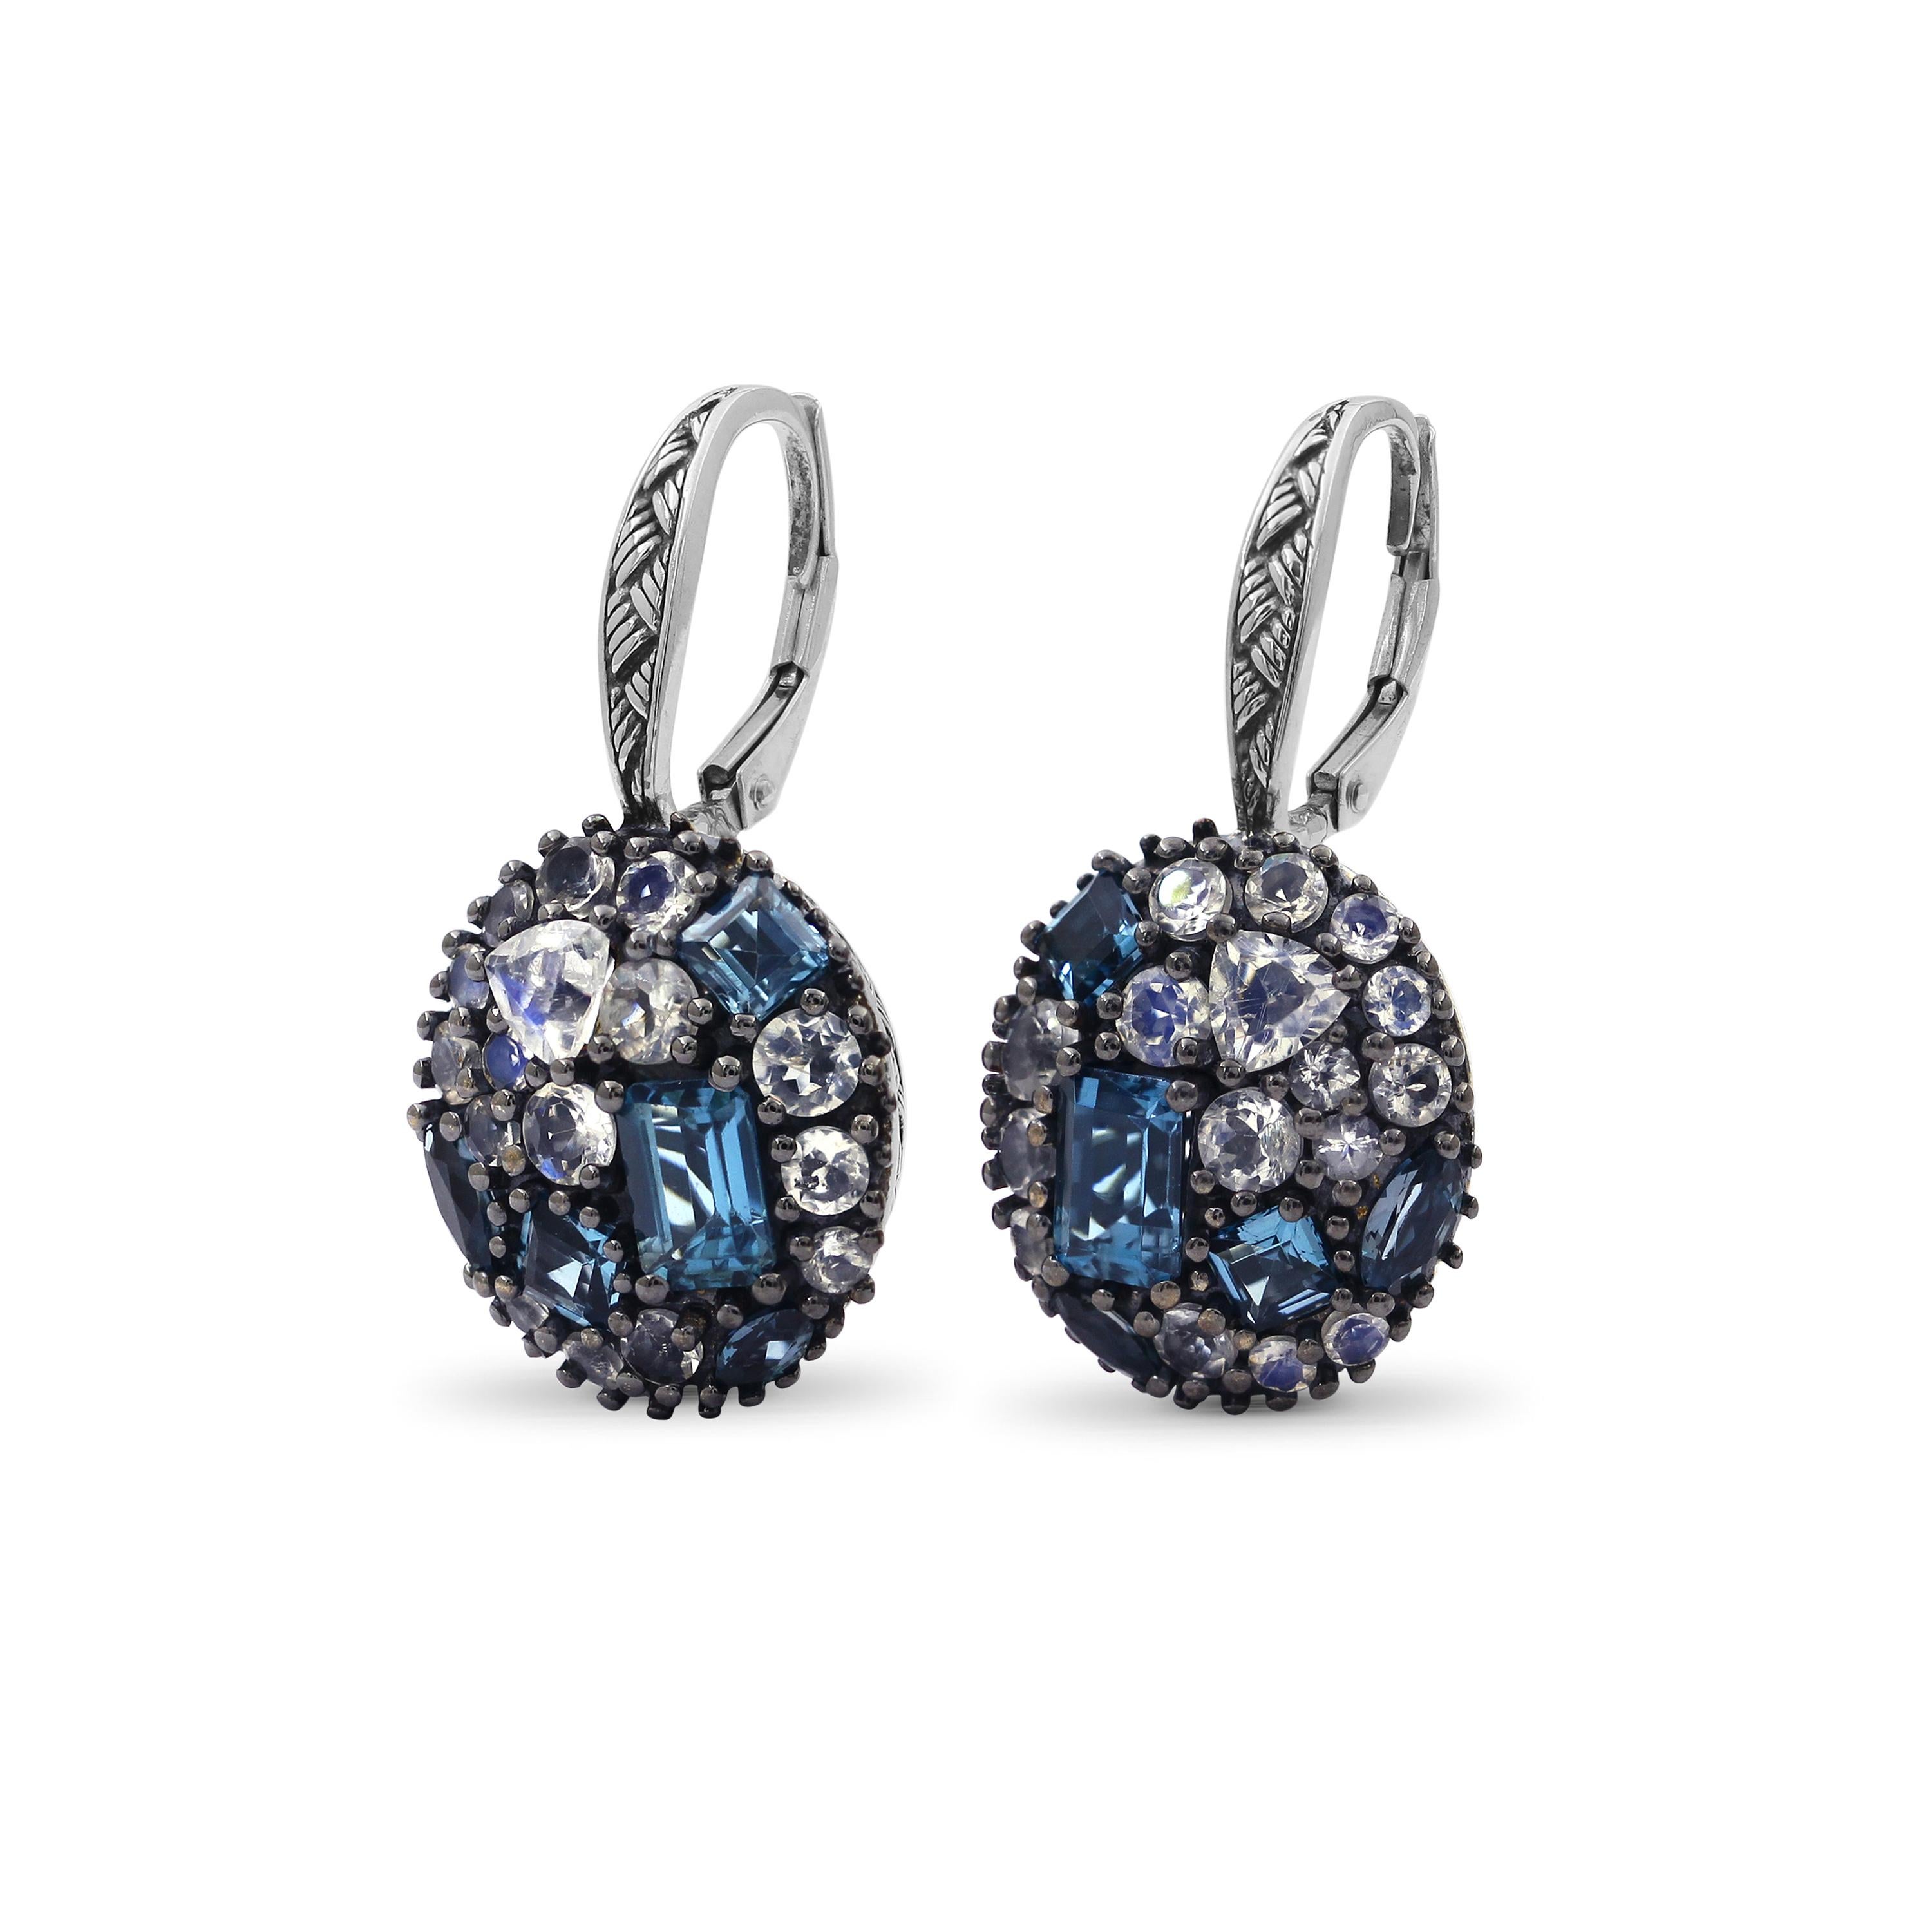 • Stephen Dweck Garden of Stephen Collection  
• 925 Sterling Silver
• 1.22” X 0.61”

Indulge in the luxurious elegance of Stephen Dweck's latest masterpiece: the London Blue Topaz and Moon Quartz Earrings in Sterling Silver. These breathtaking